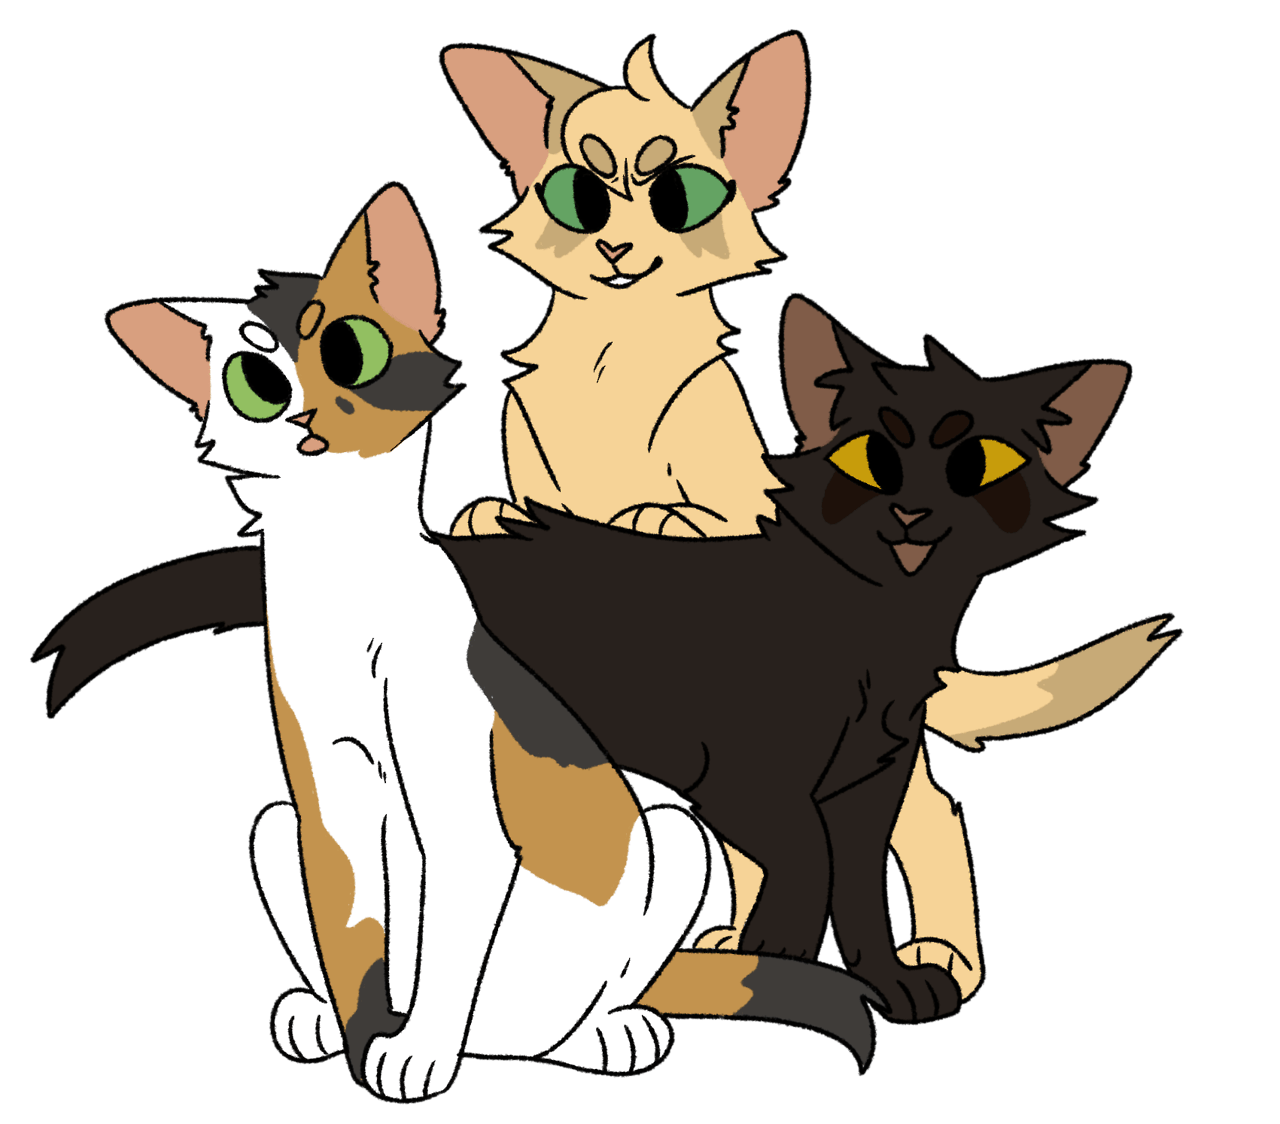 [Patchkit, Larchkit, and Petalkit sit together and tumble over each other]